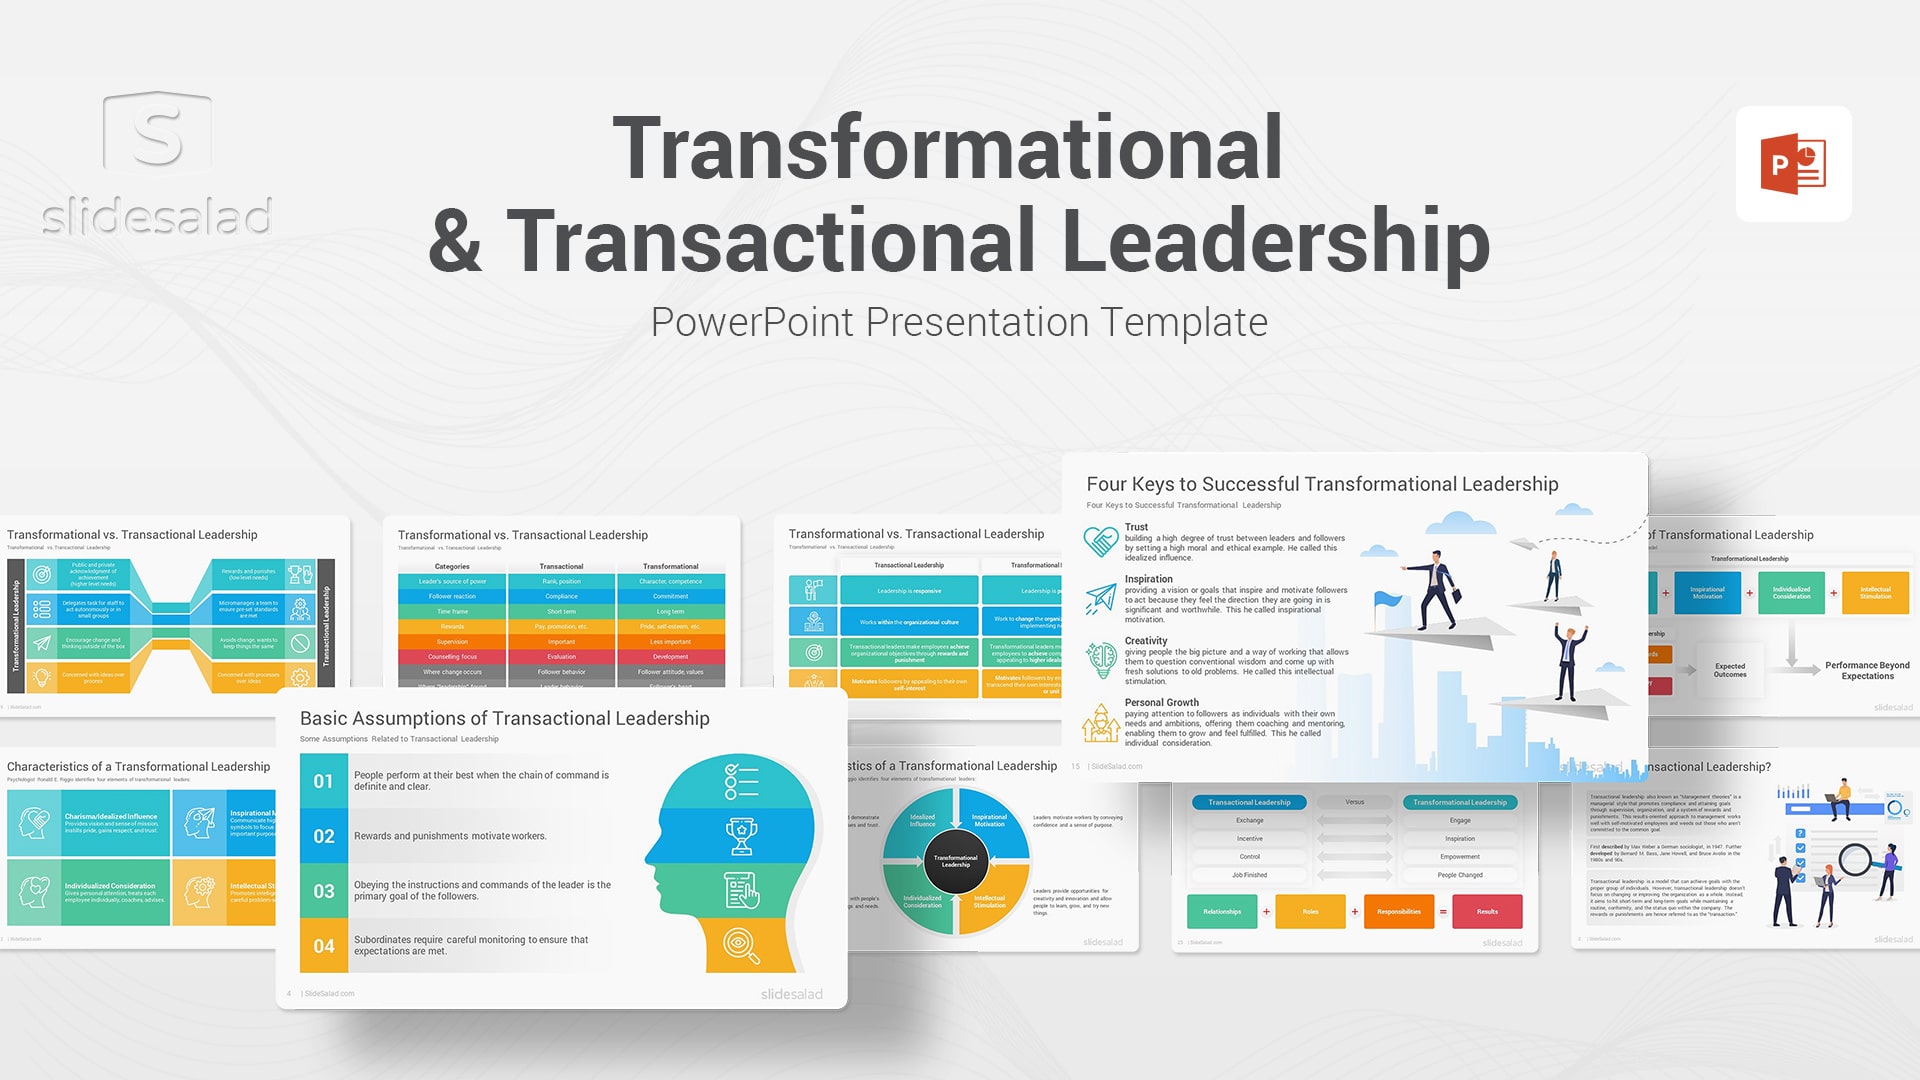 Transformational and Transactional Leadership PowerPoint Template - Top Selling Premium Leadership Practices PowerPoint Template